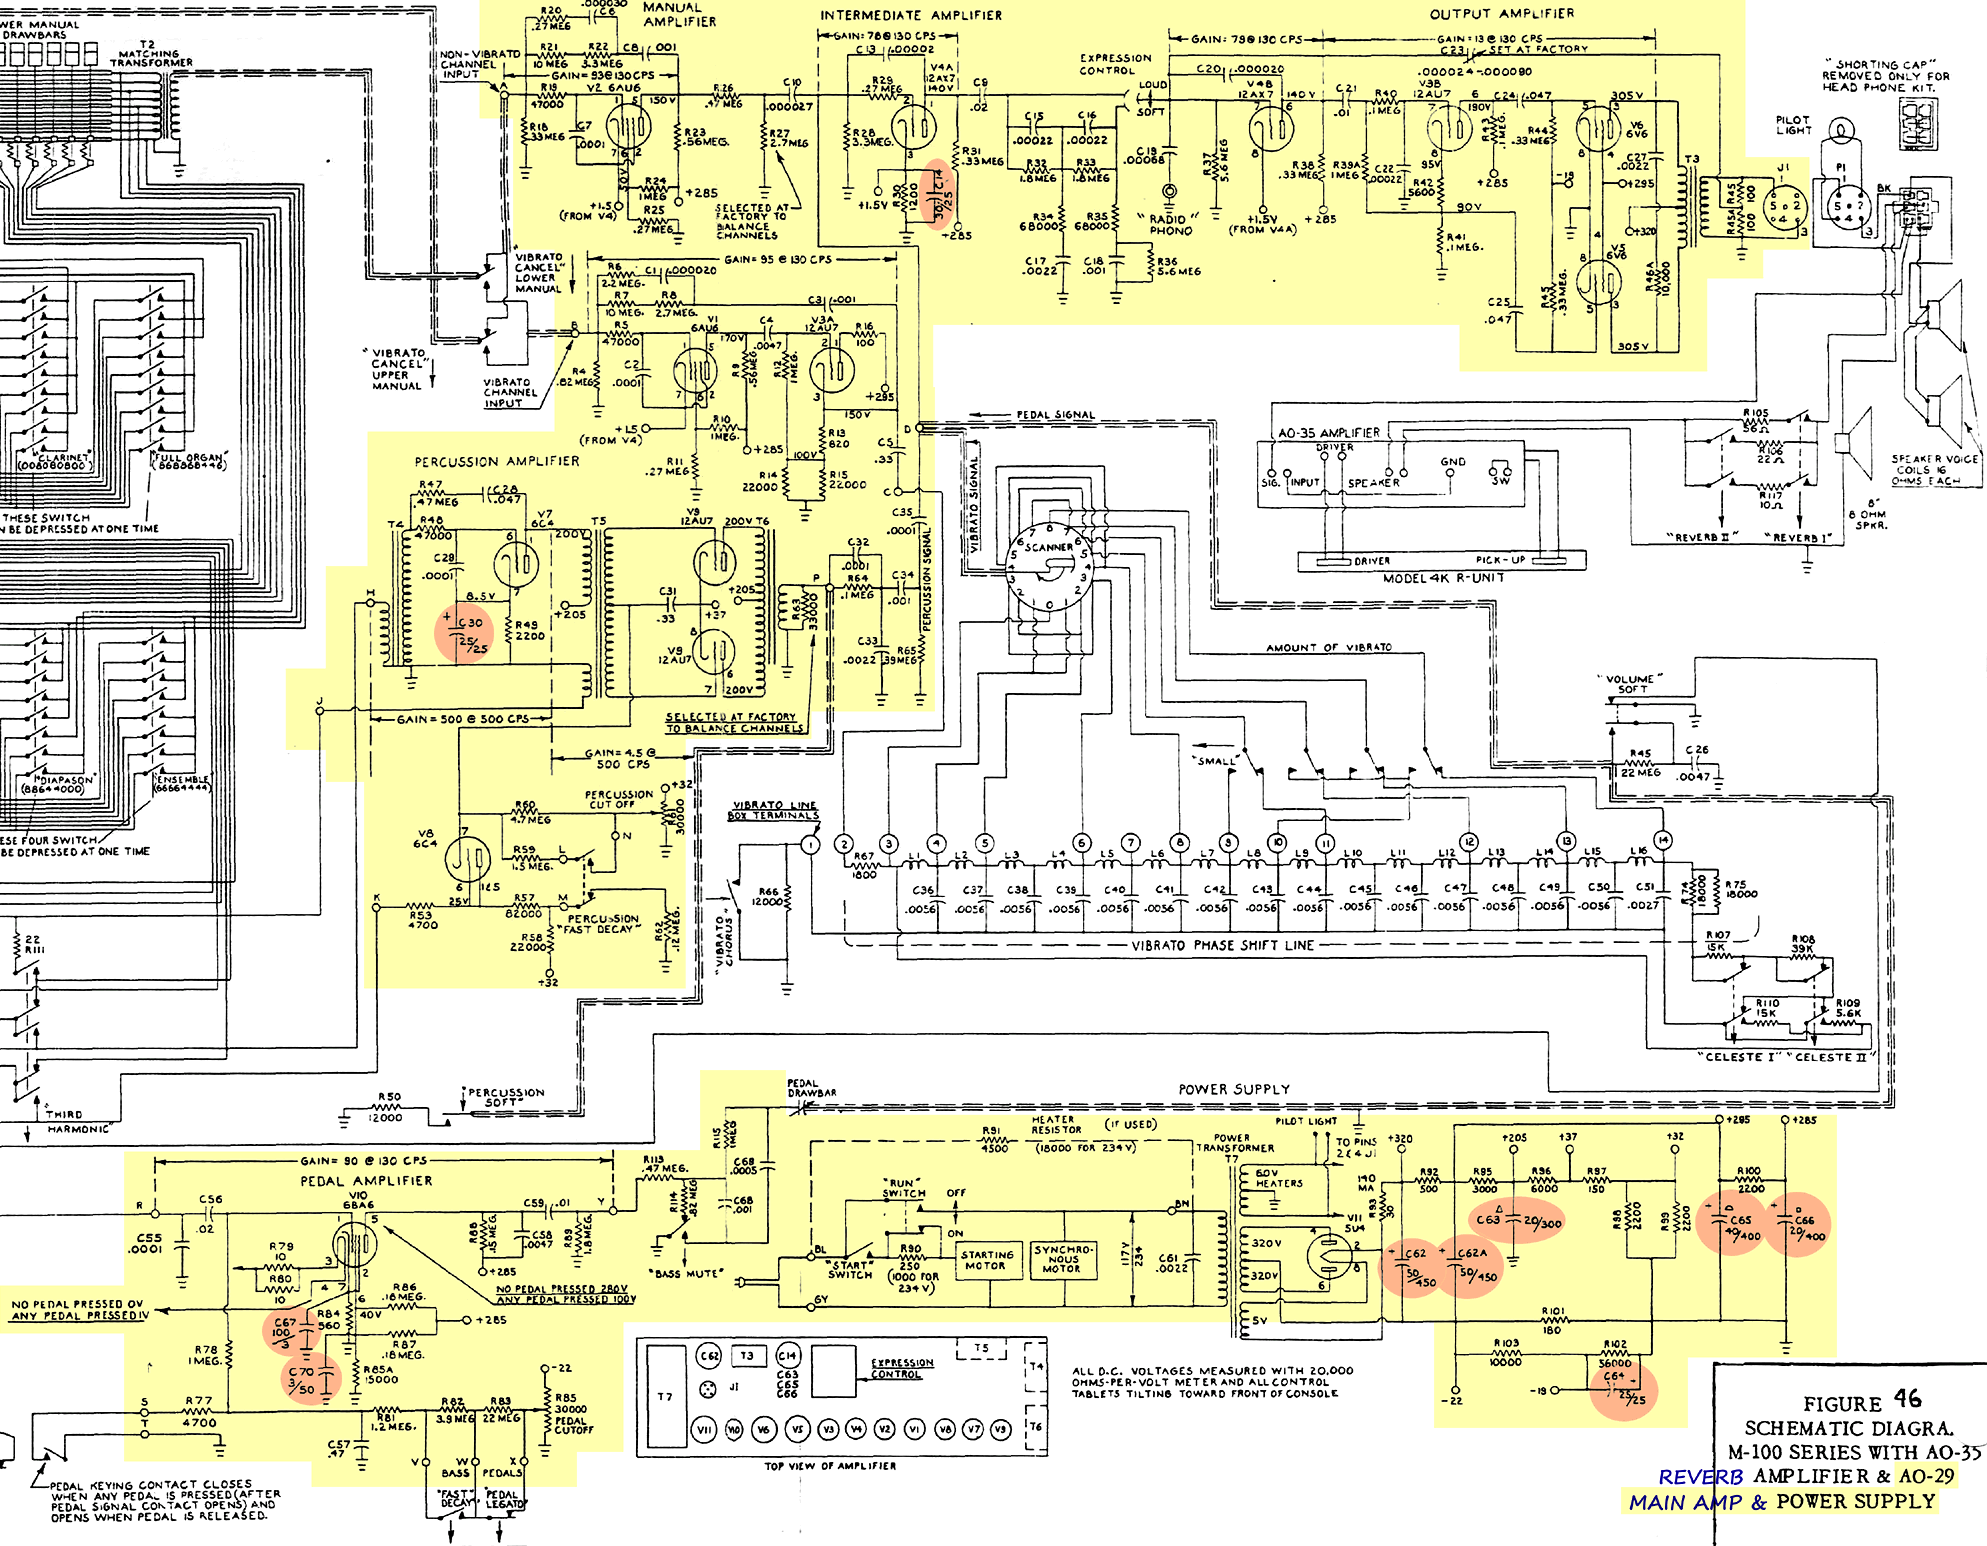 wiring diagram for hammond a100